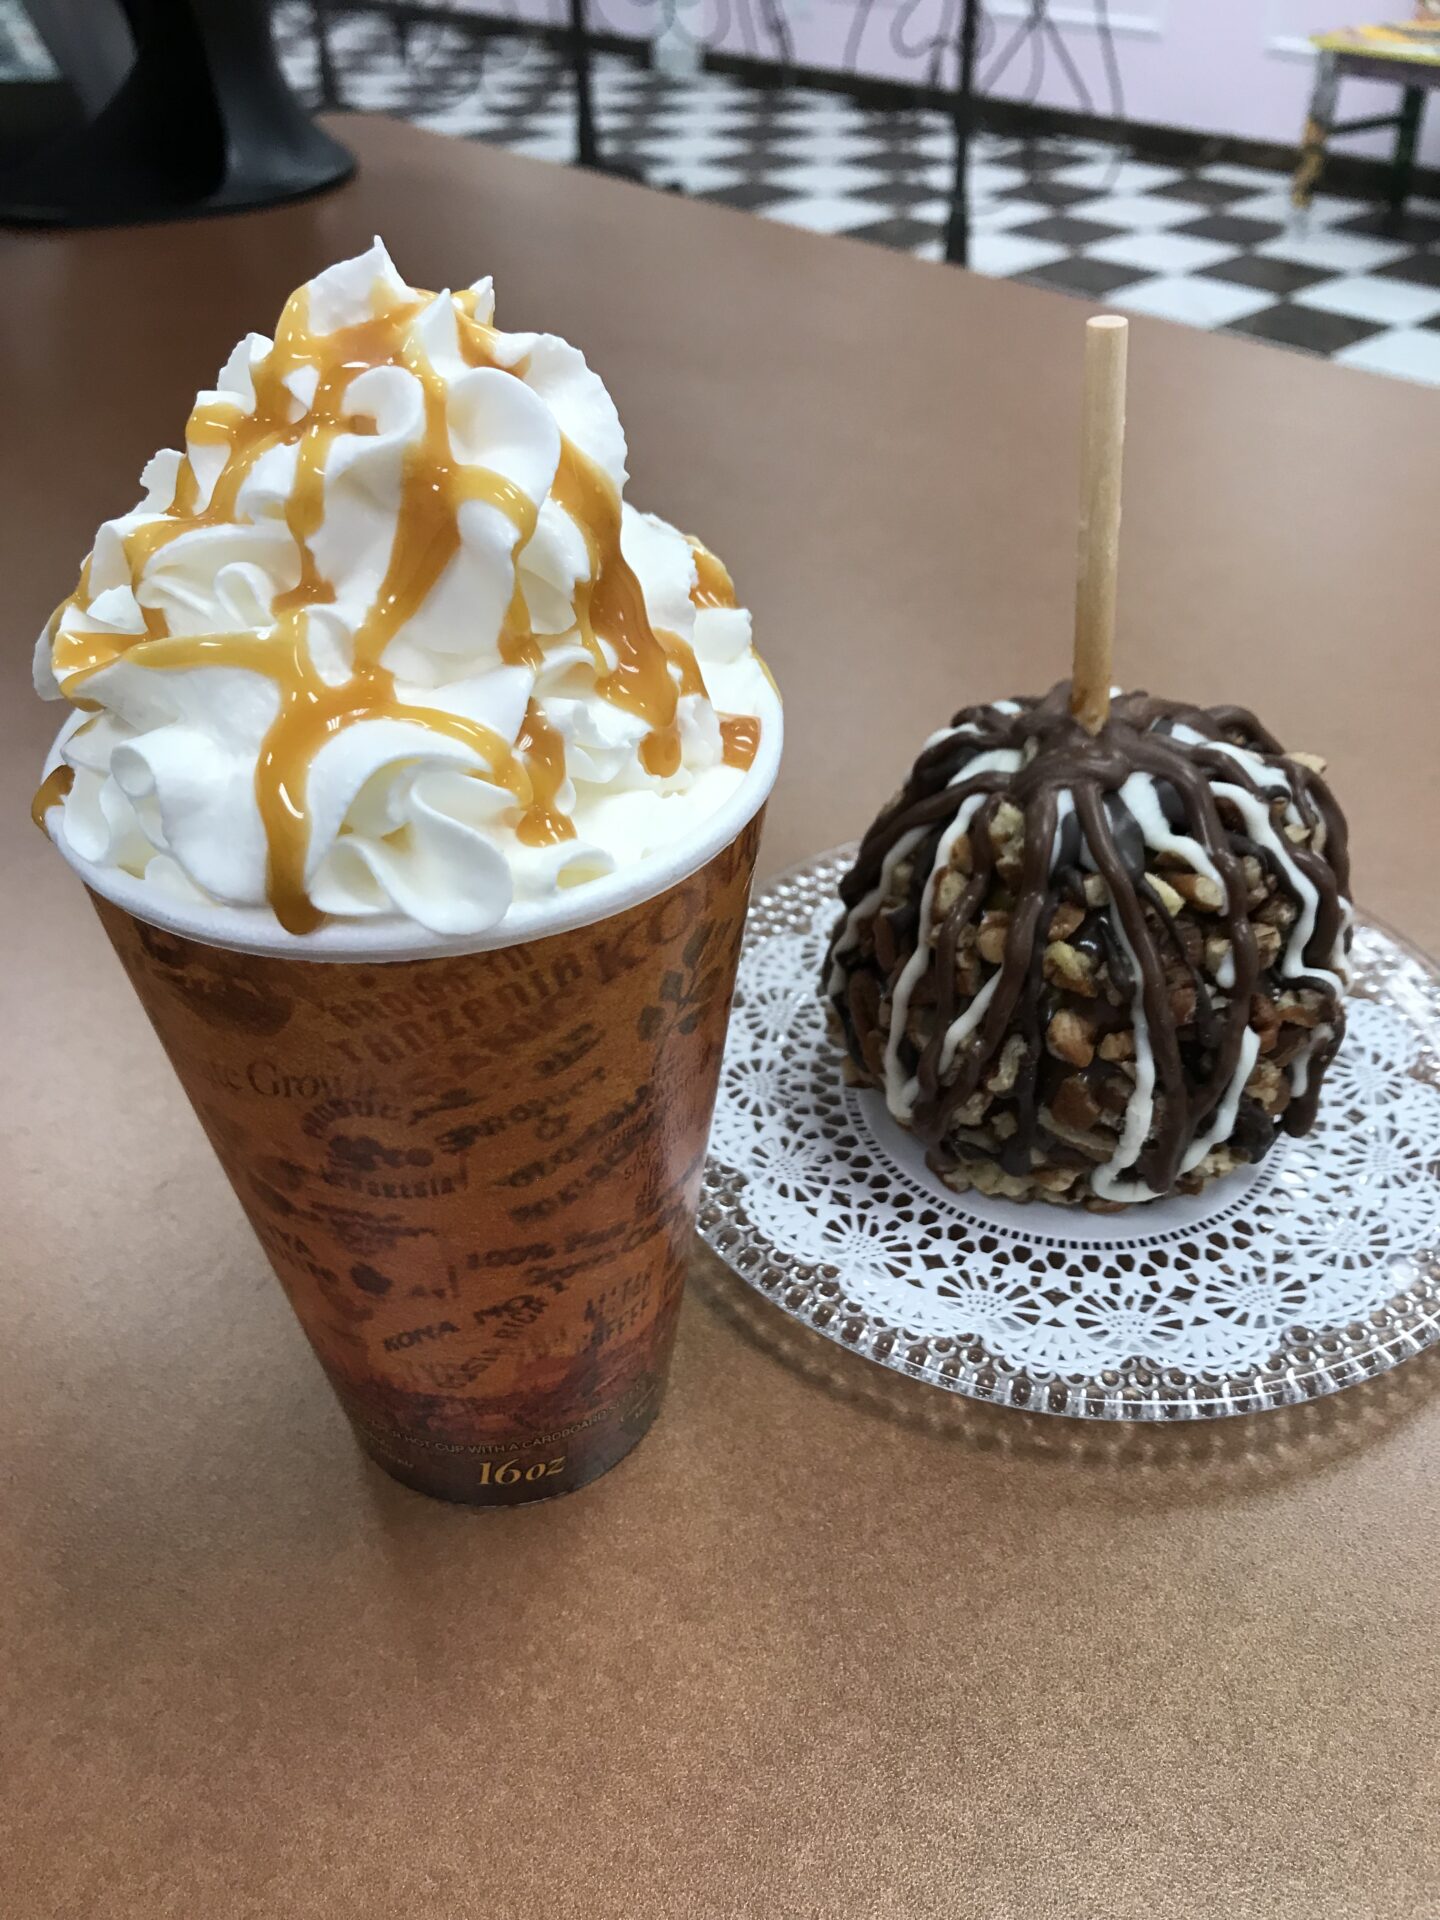 A cup of frappe and a candied apple